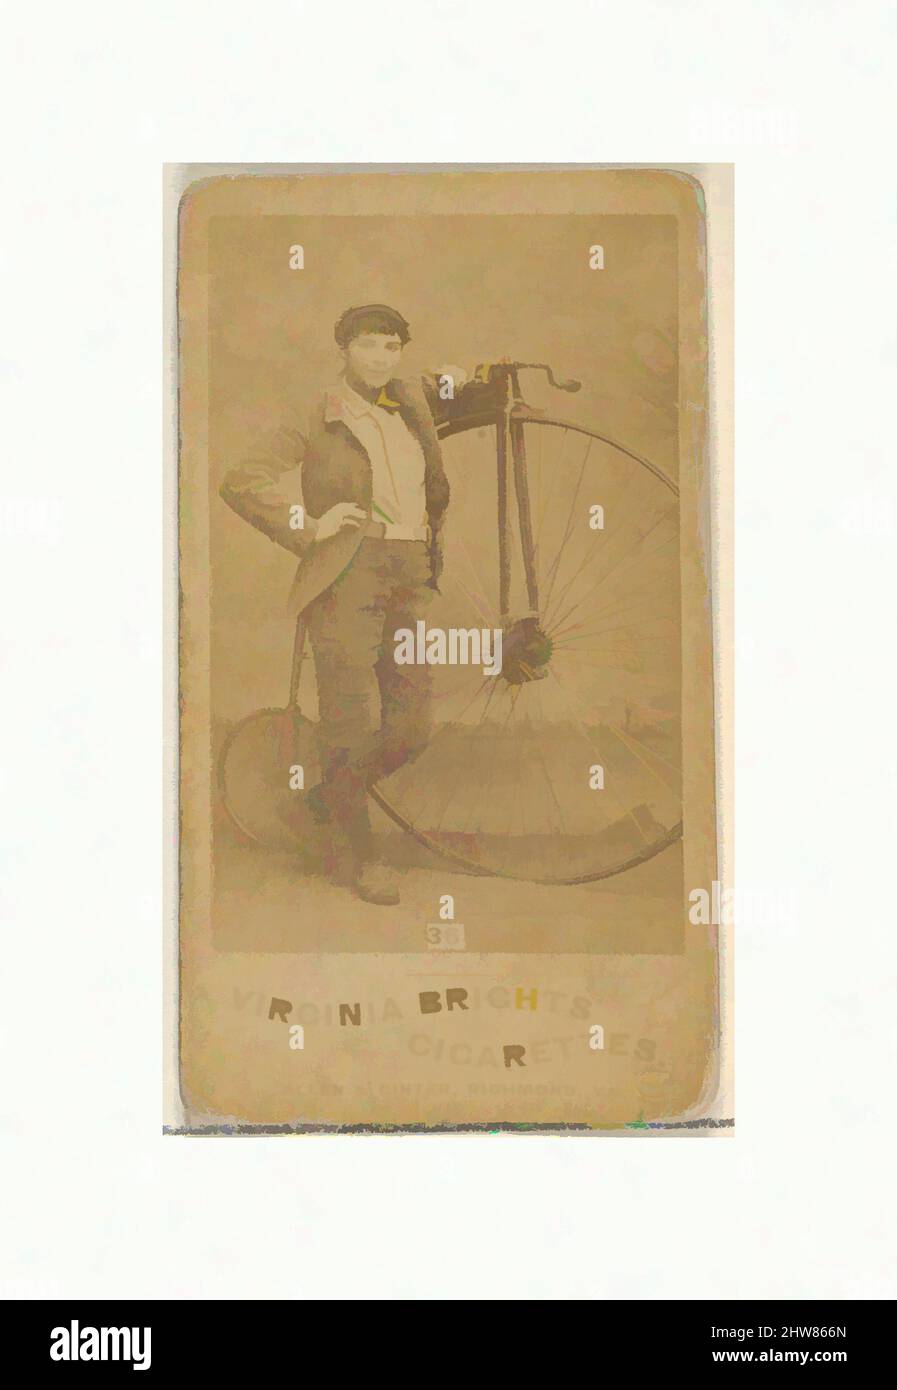 Art inspired by Card 36, from the Girl Cyclists series (N49) for Virginia Brights Cigarettes, 1887, Albumen photograph, Sheet: 2 3/4 x 1 3/8 in. (7 x 3.5 cm), Trade cards from the 'Girl Cyclists' series (N49), issued in 1887 by Allen & Ginter to promote Virginia Brights Cigarettes, Classic works modernized by Artotop with a splash of modernity. Shapes, color and value, eye-catching visual impact on art. Emotions through freedom of artworks in a contemporary way. A timeless message pursuing a wildly creative new direction. Artists turning to the digital medium and creating the Artotop NFT Stock Photo